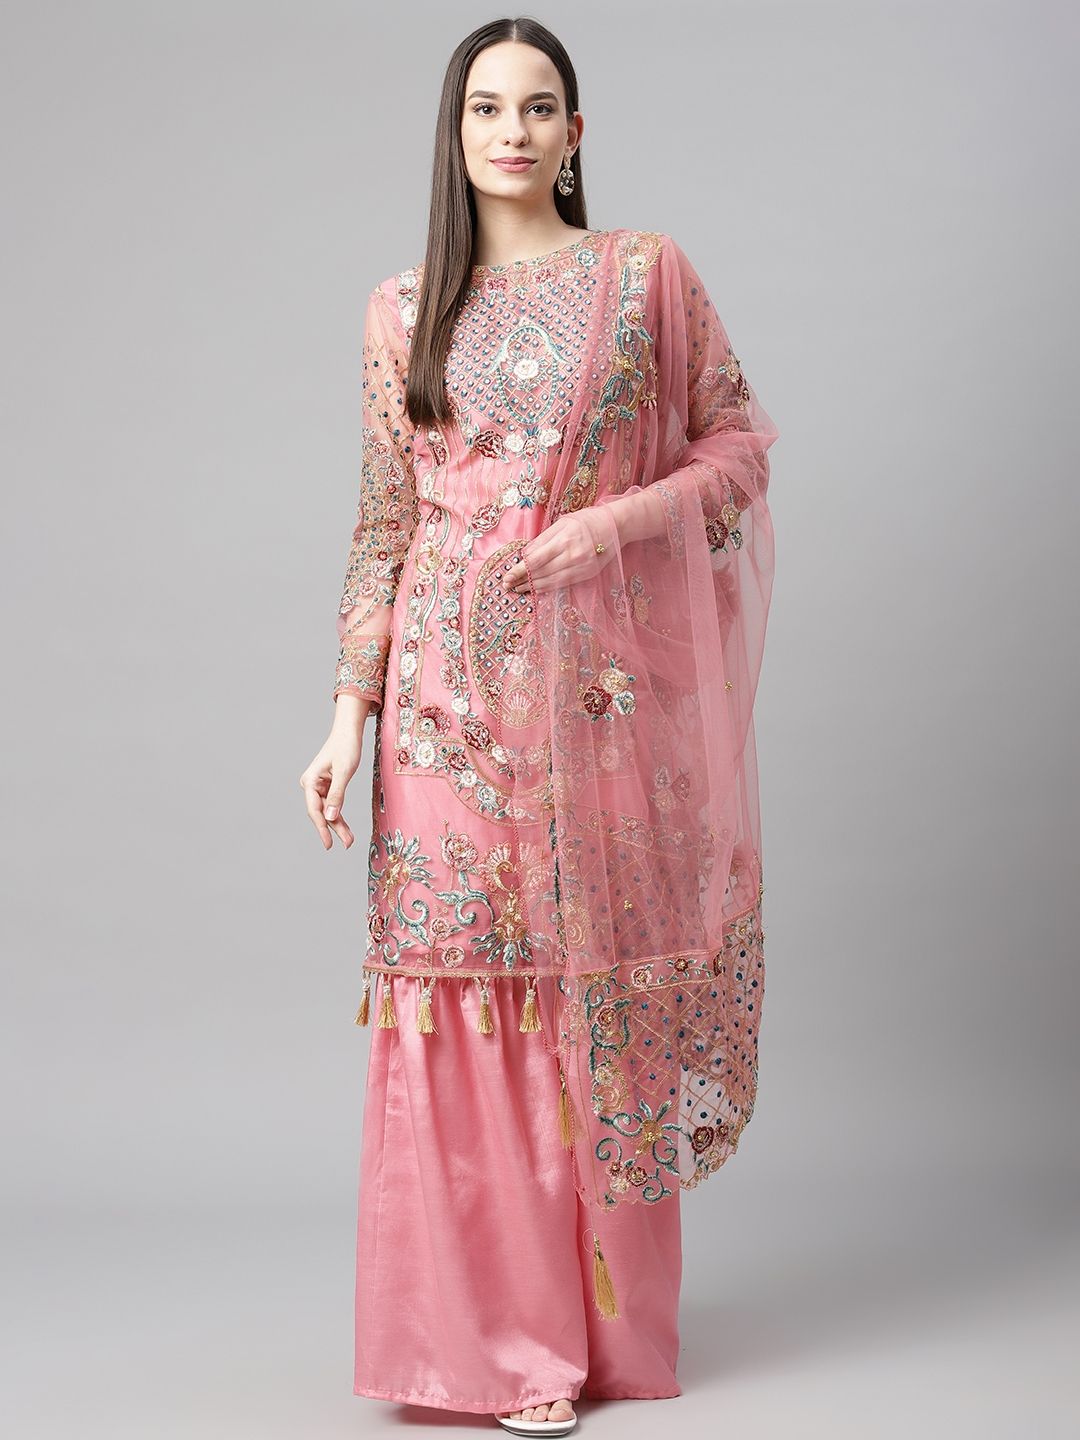 Readiprint Fashions Pink Embroidered Unstitched Dress Material Price in India